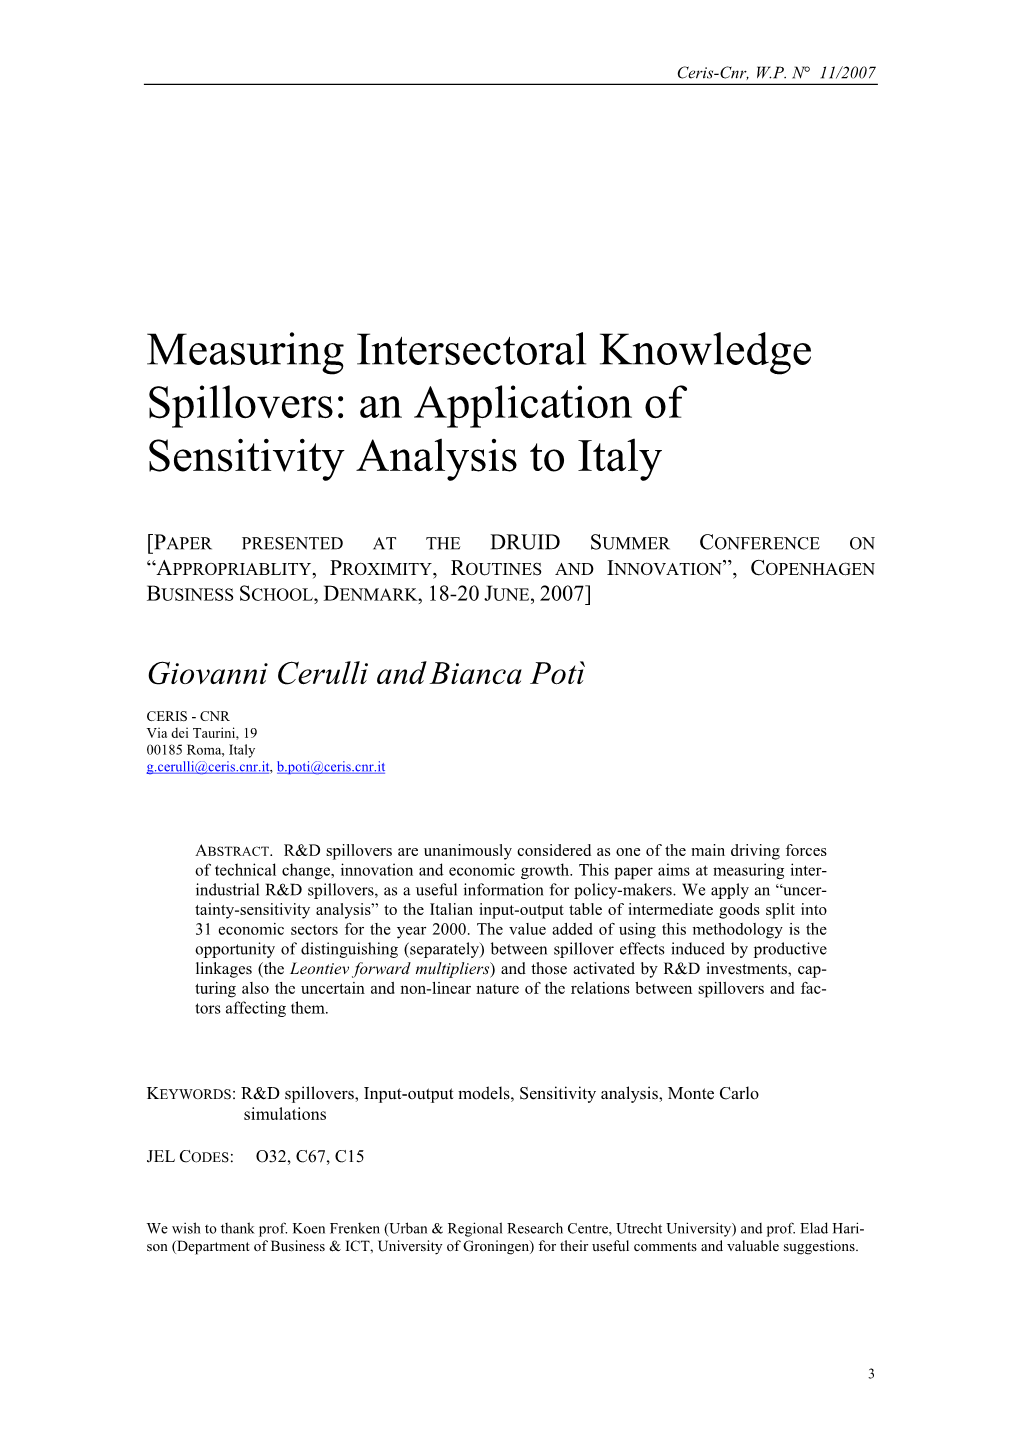 Measuring Intersectoral Knowledge Spillovers: an Application of Sensitivity Analysis to Italy